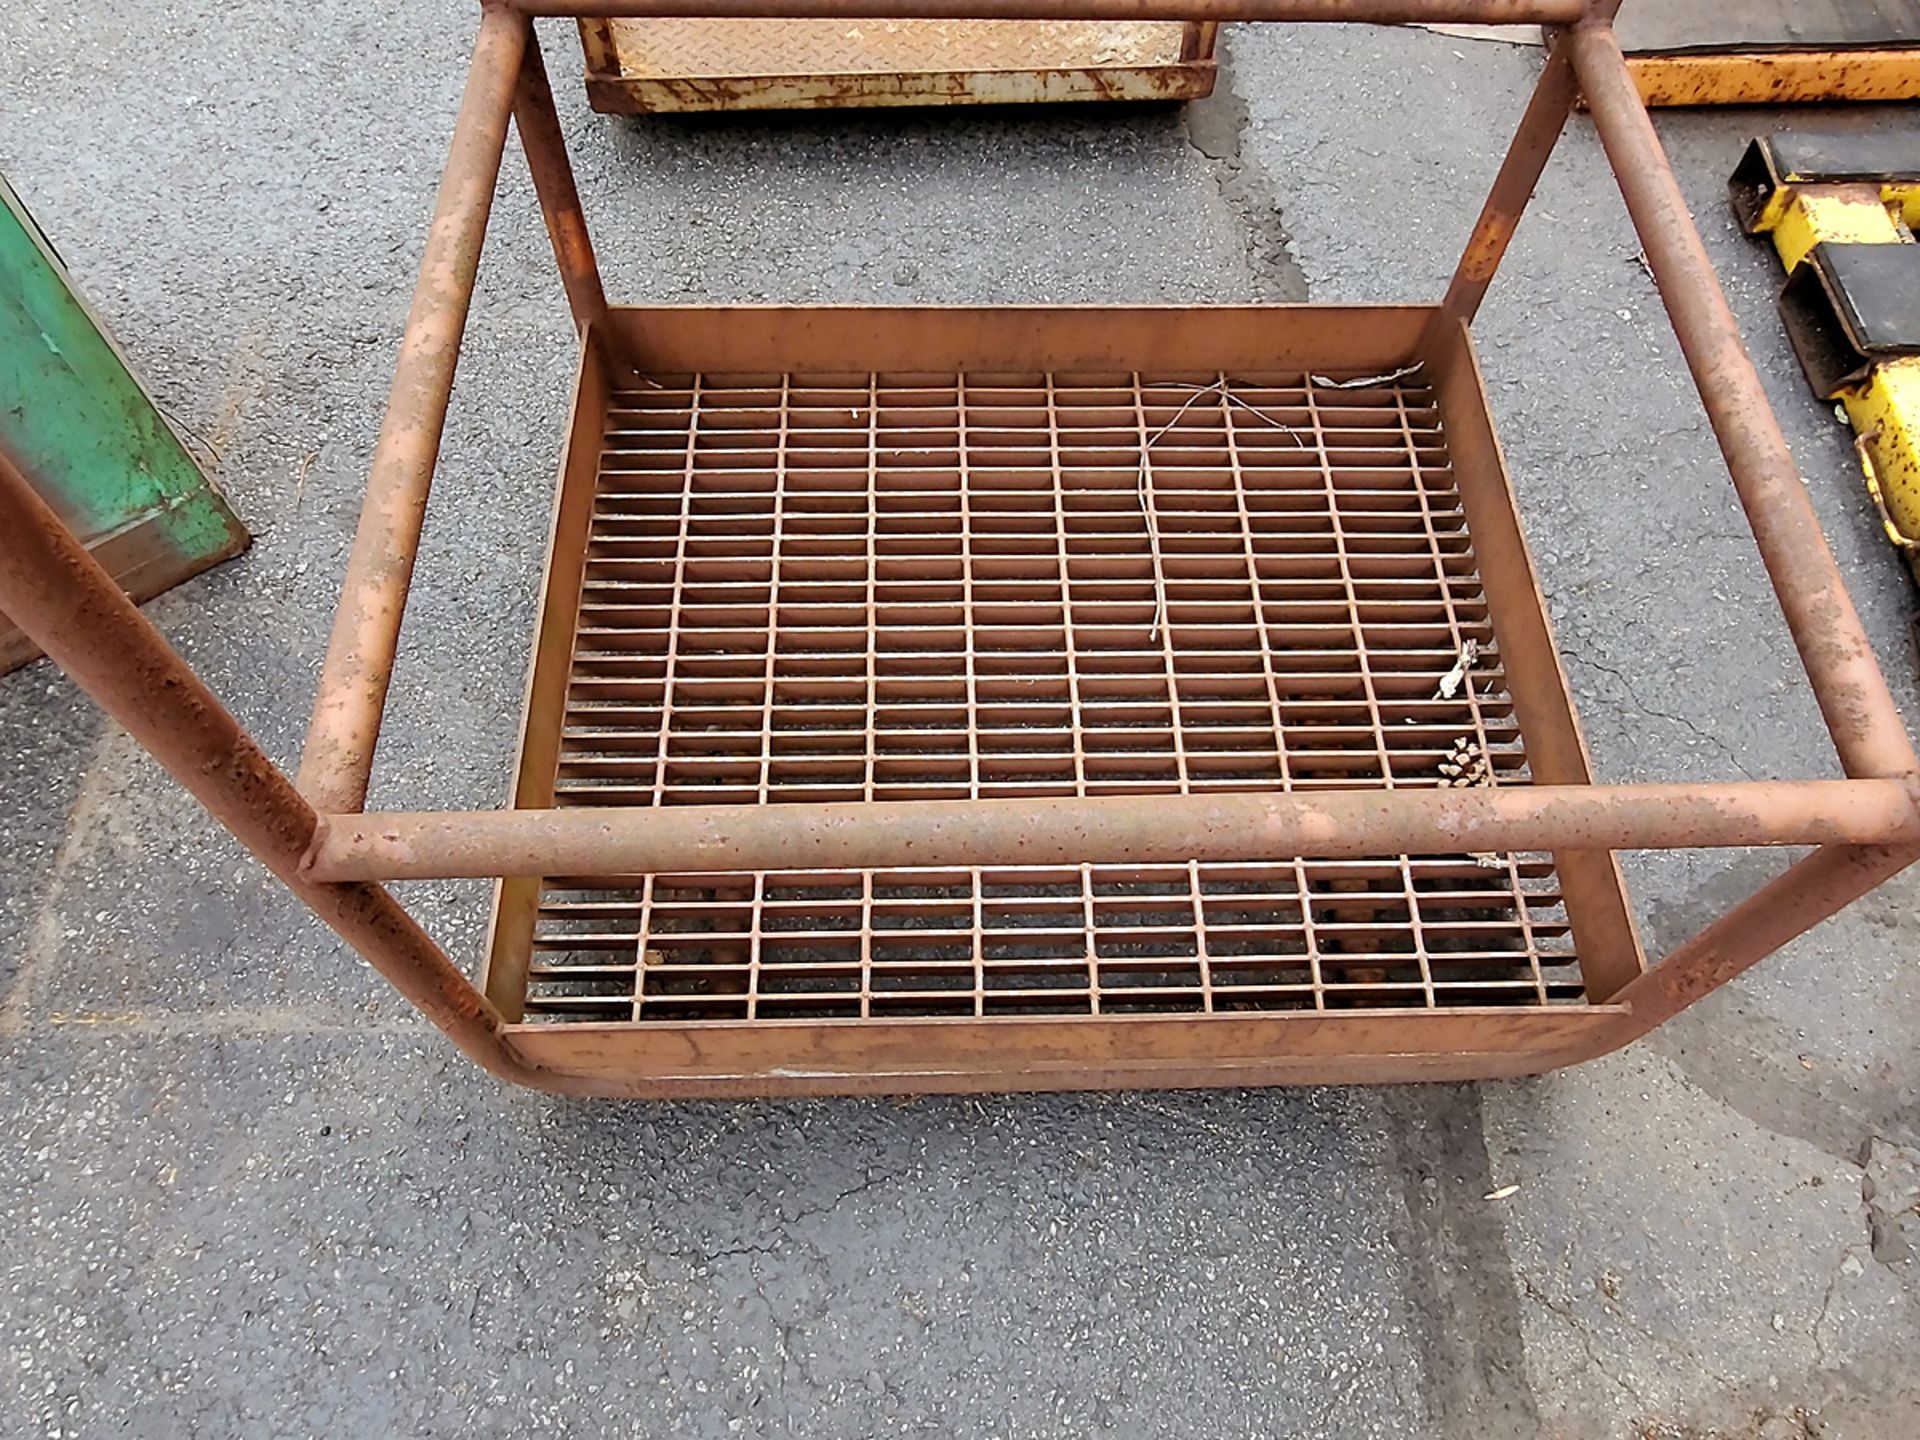 Man Lift Safety Cage - Image 2 of 3